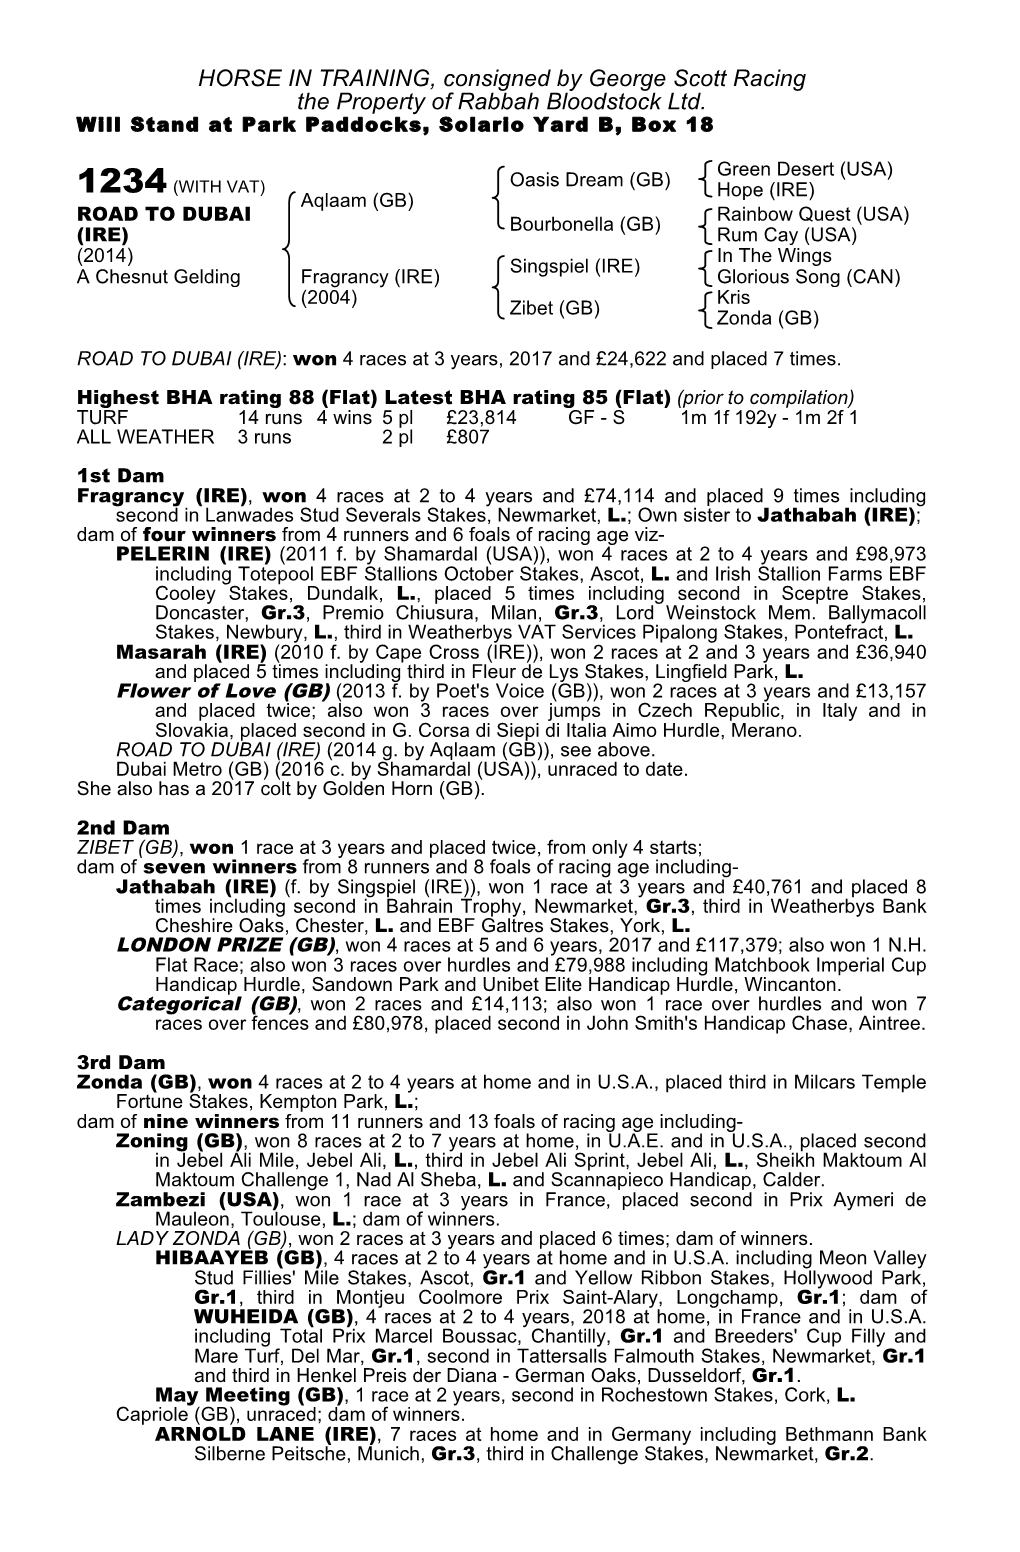 HORSE in TRAINING, Consigned by George Scott Racing the Property of Rabbah Bloodstock Ltd